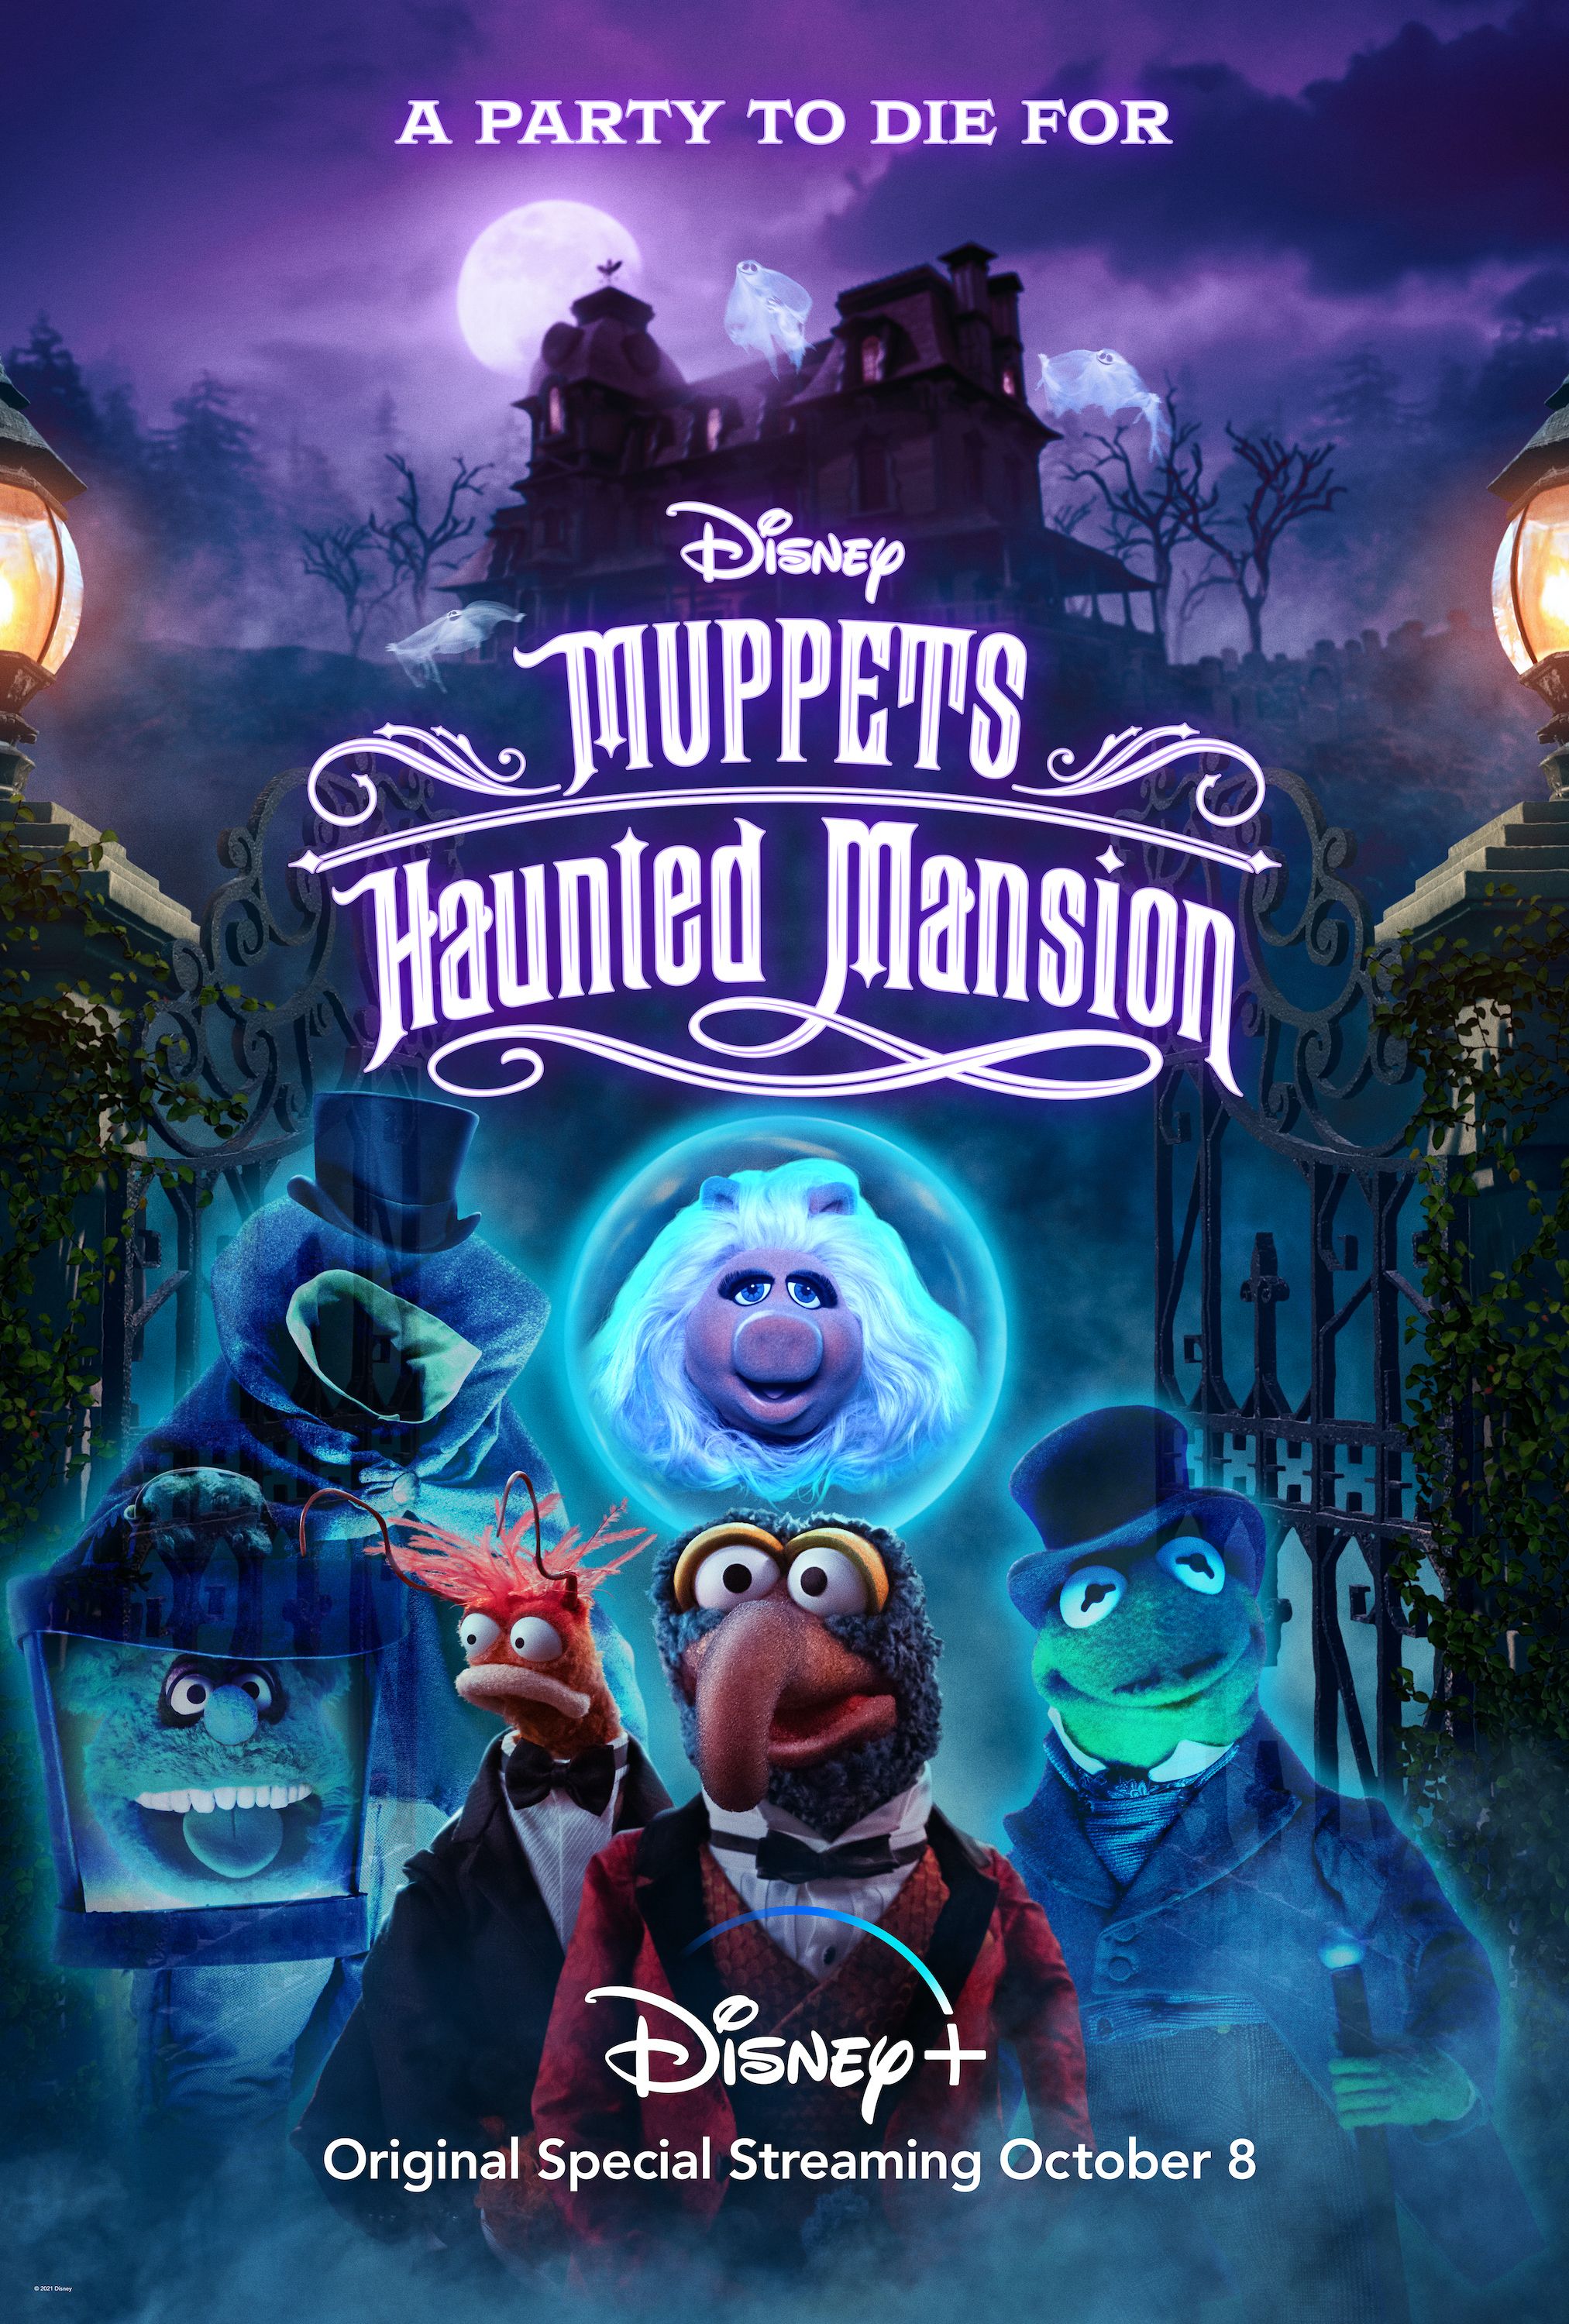 Muppets Haunted Mansion Poster Confirms Halloween Special Release Date